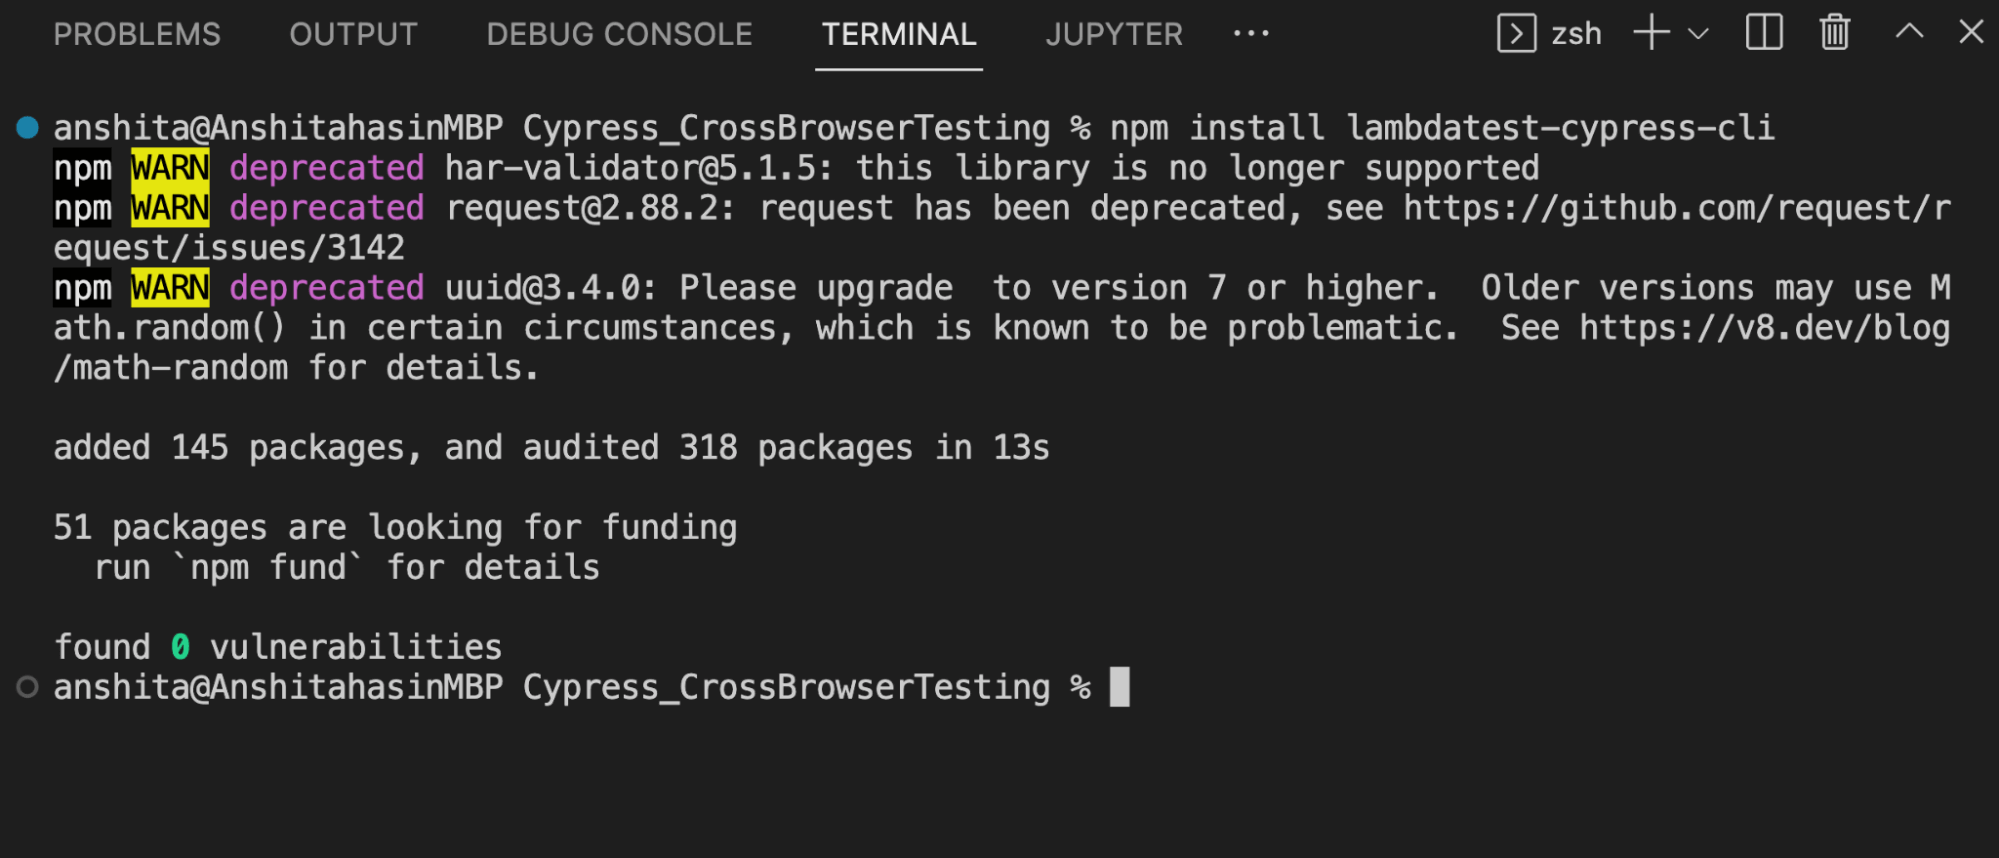 Cross Browser Testing With Cypress npm install lambdatest-cypress-cli